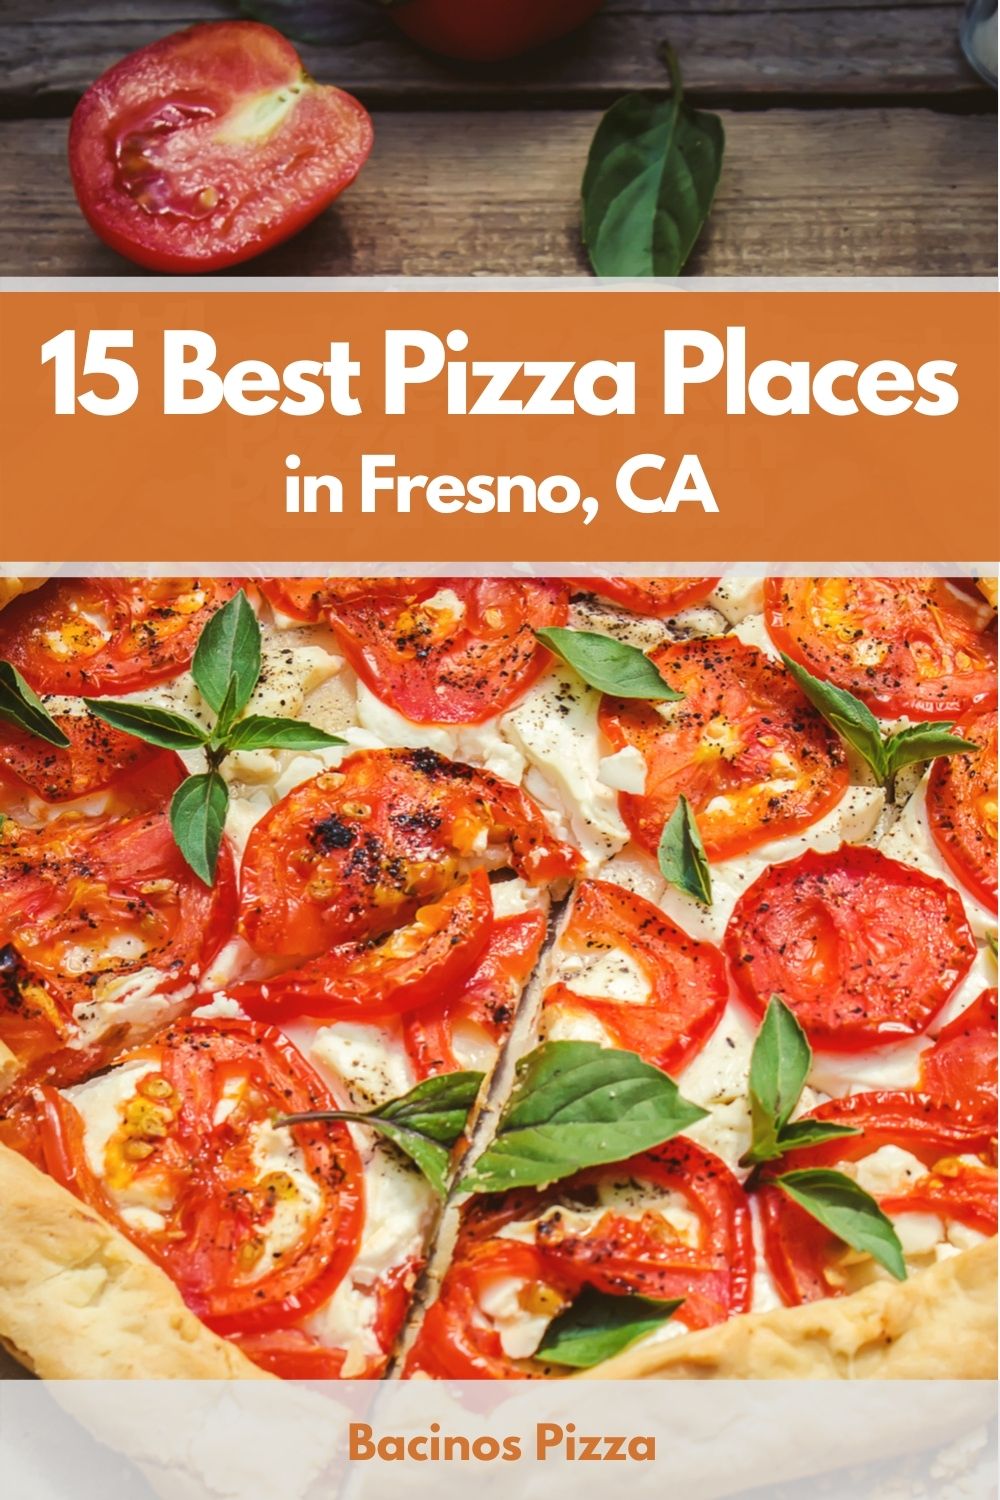 15 Best Pizza Places in Fresno, CA pin 2